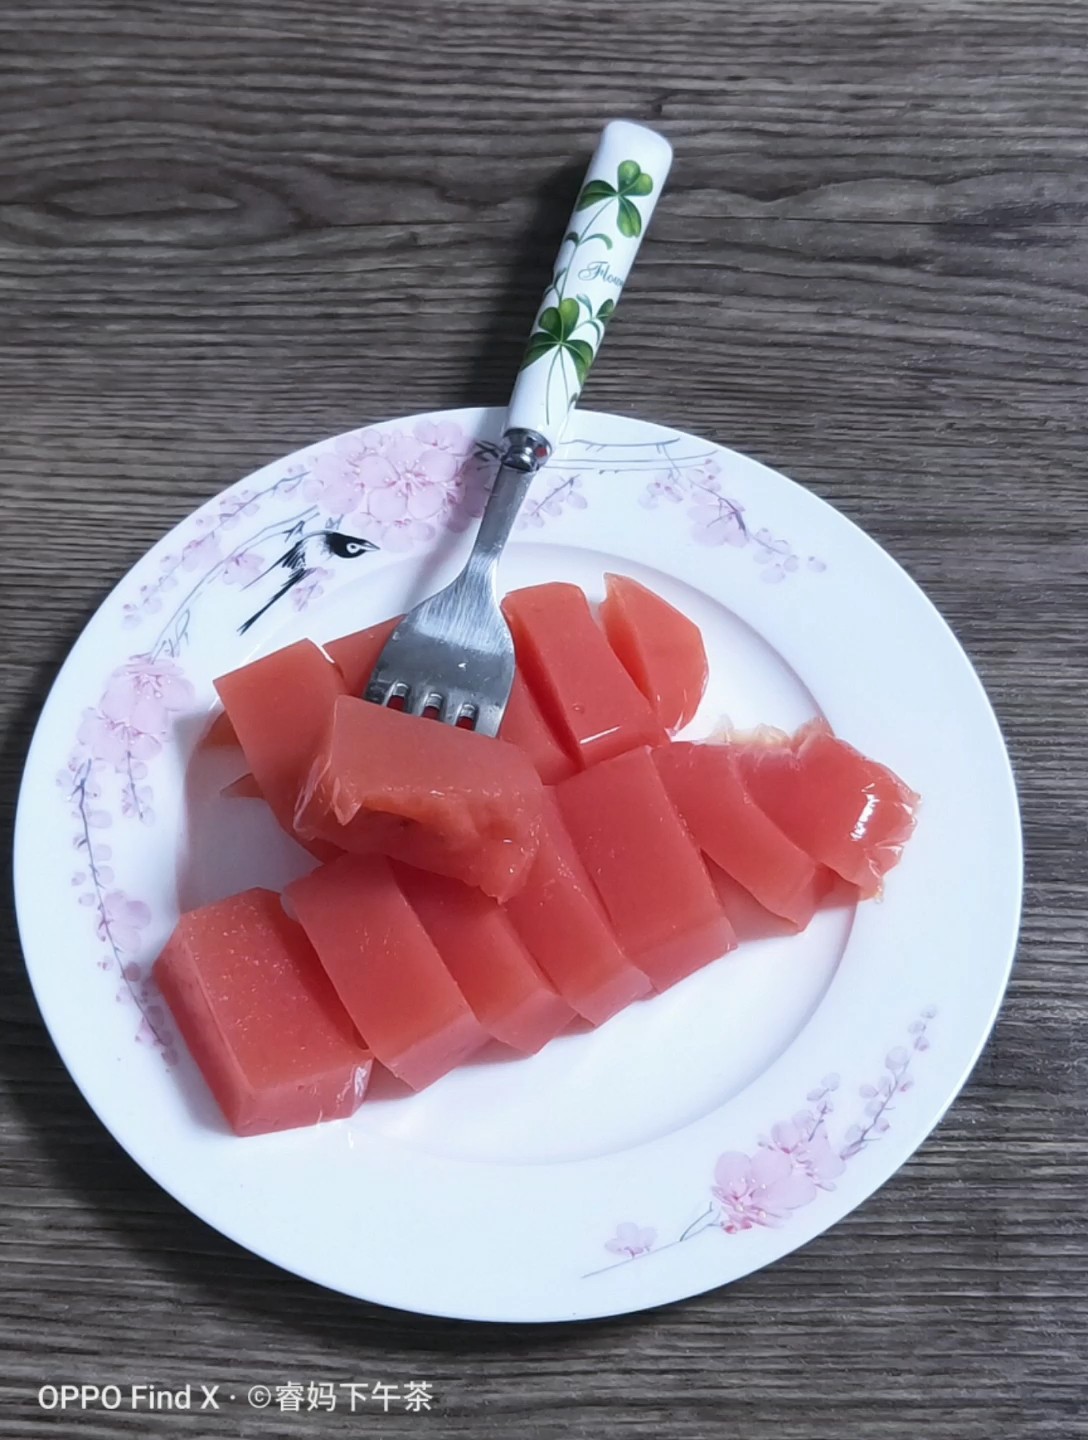 Pea Jelly with Watermelon Sauce